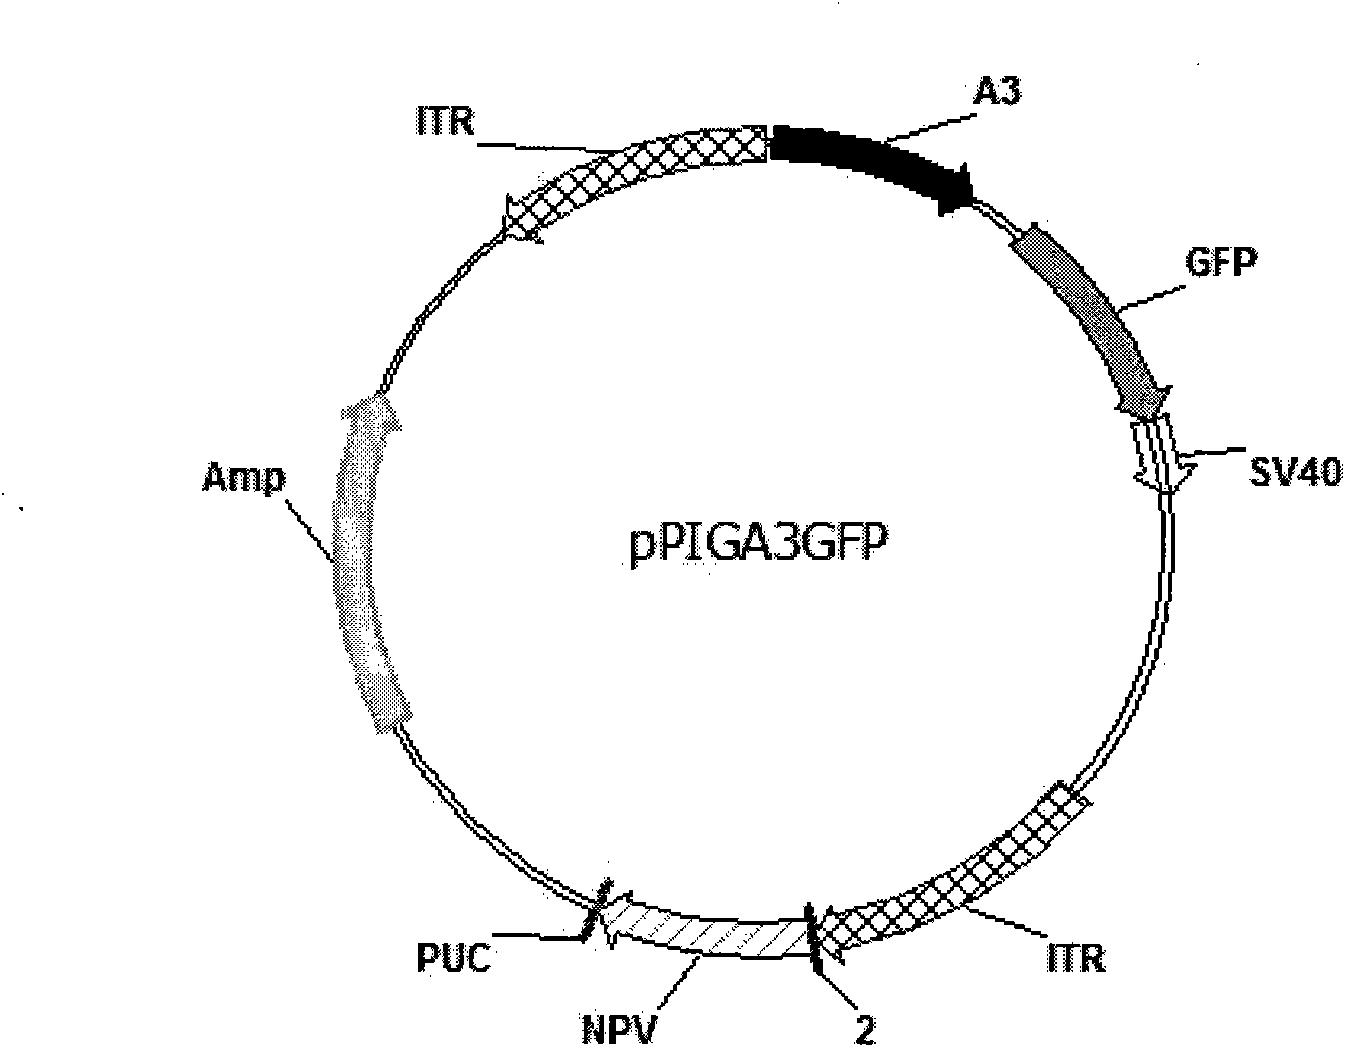 Method for breeding Macropodus opercularis with transferred green fluorescent protein gene by using piggyBac transposons